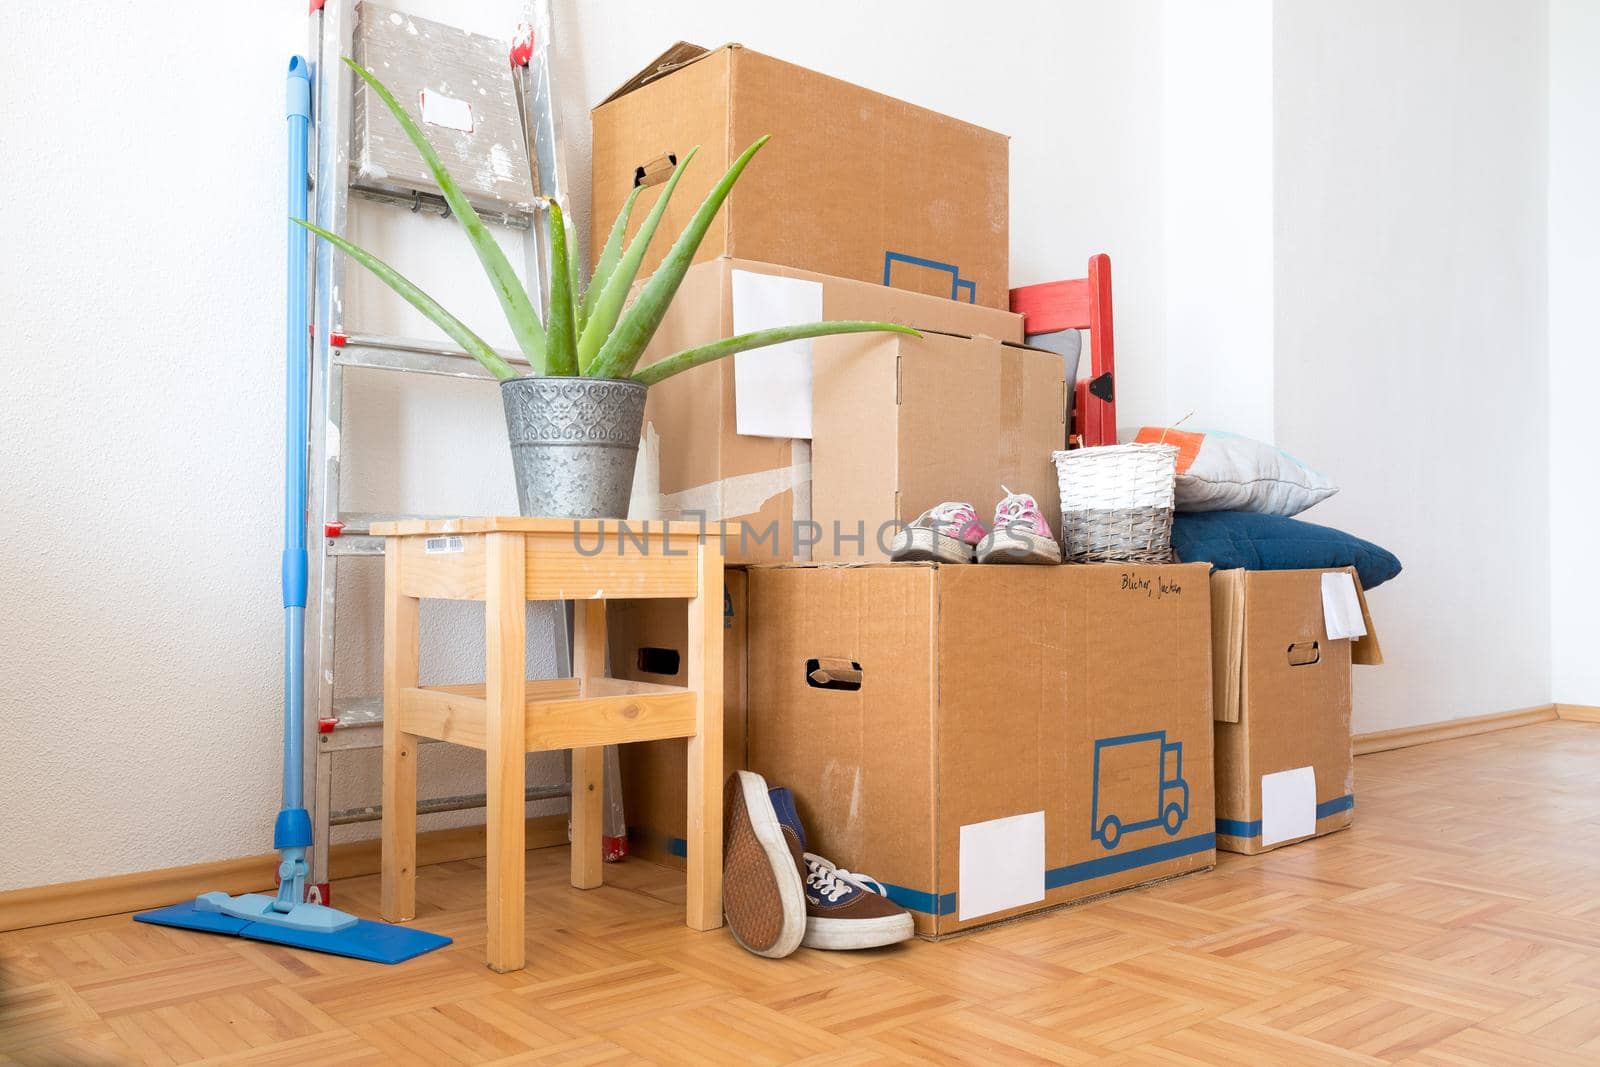 Move. Cardboard boxes, cleaning things and stuff for moving into a new, clean and bright home by Daxenbichler